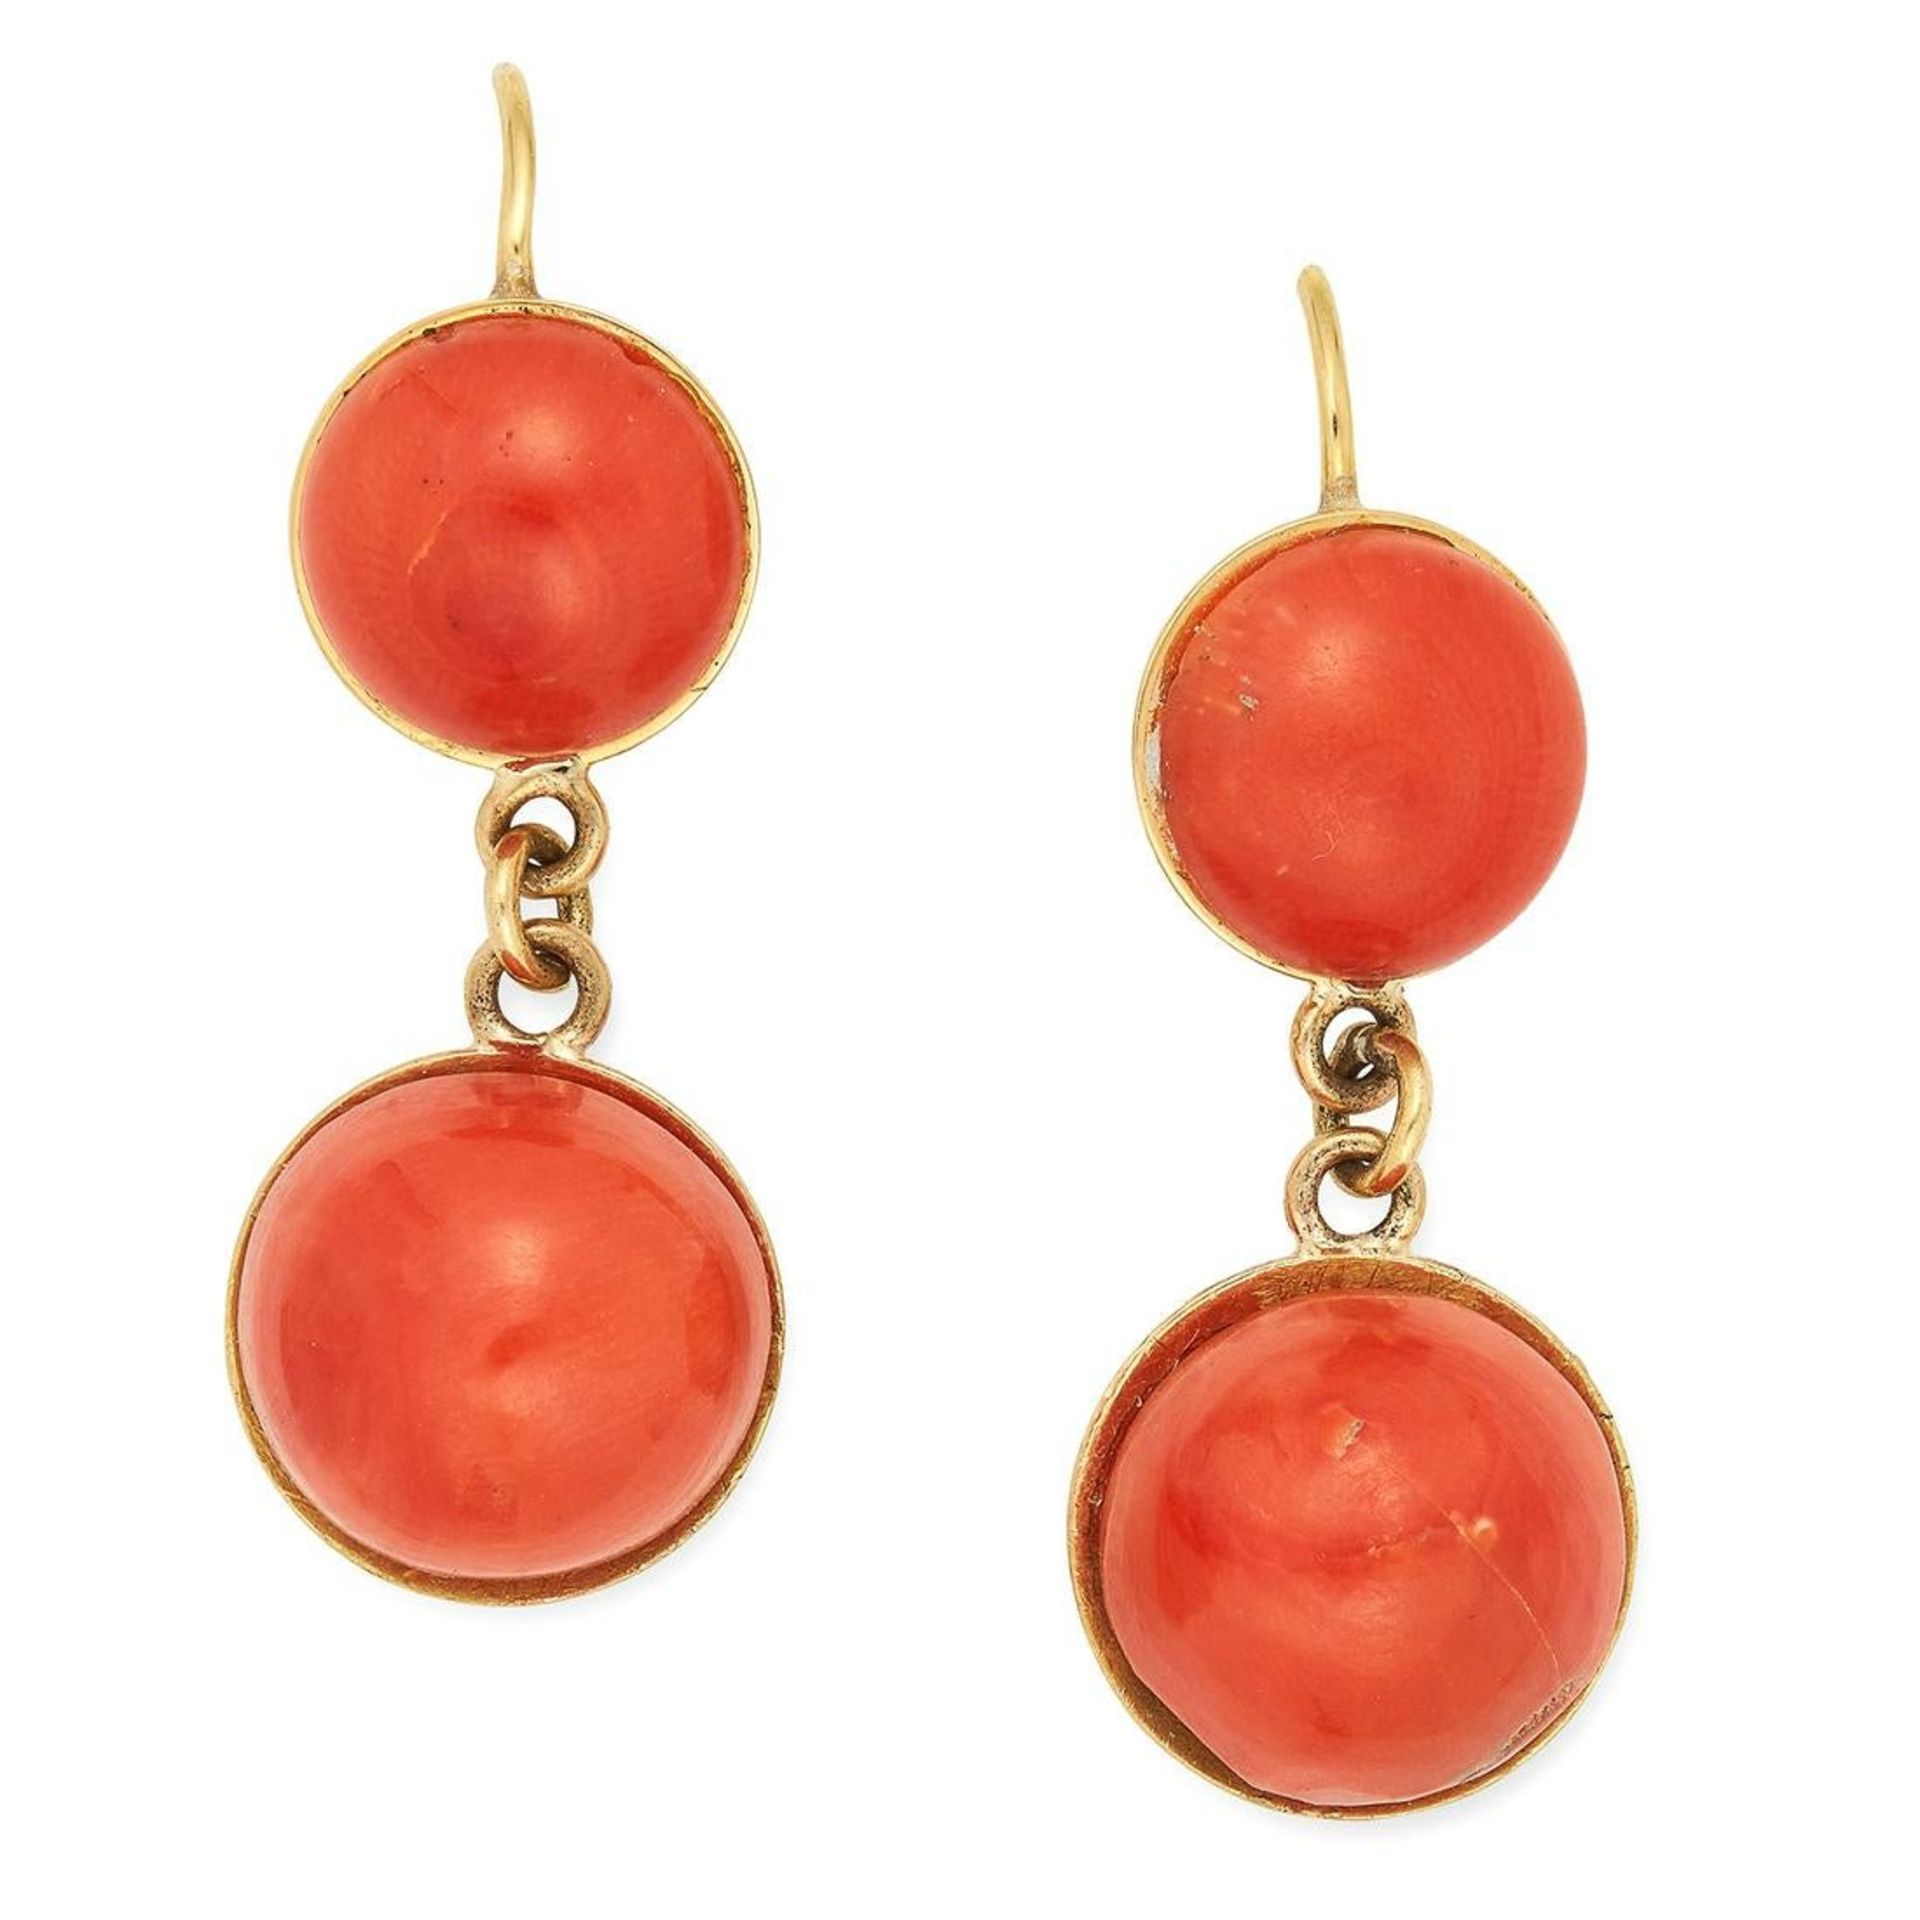 ANTIQUE CORAL EARRINGS each set with two cabochon coral, 3.3cm, 7.9g.